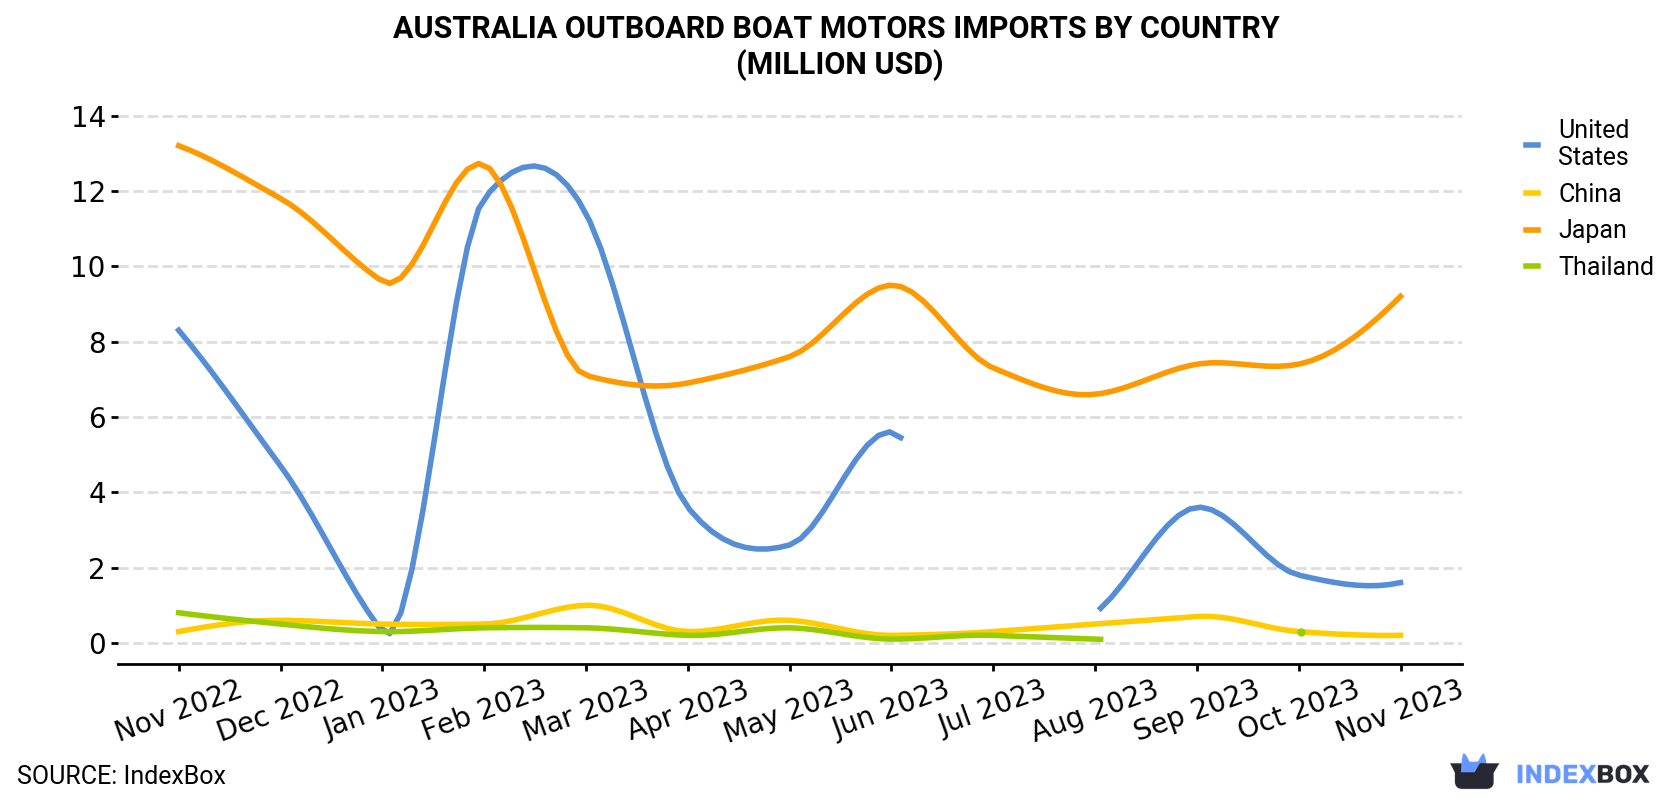 Australia Outboard Boat Motors Imports By Country (Million USD)